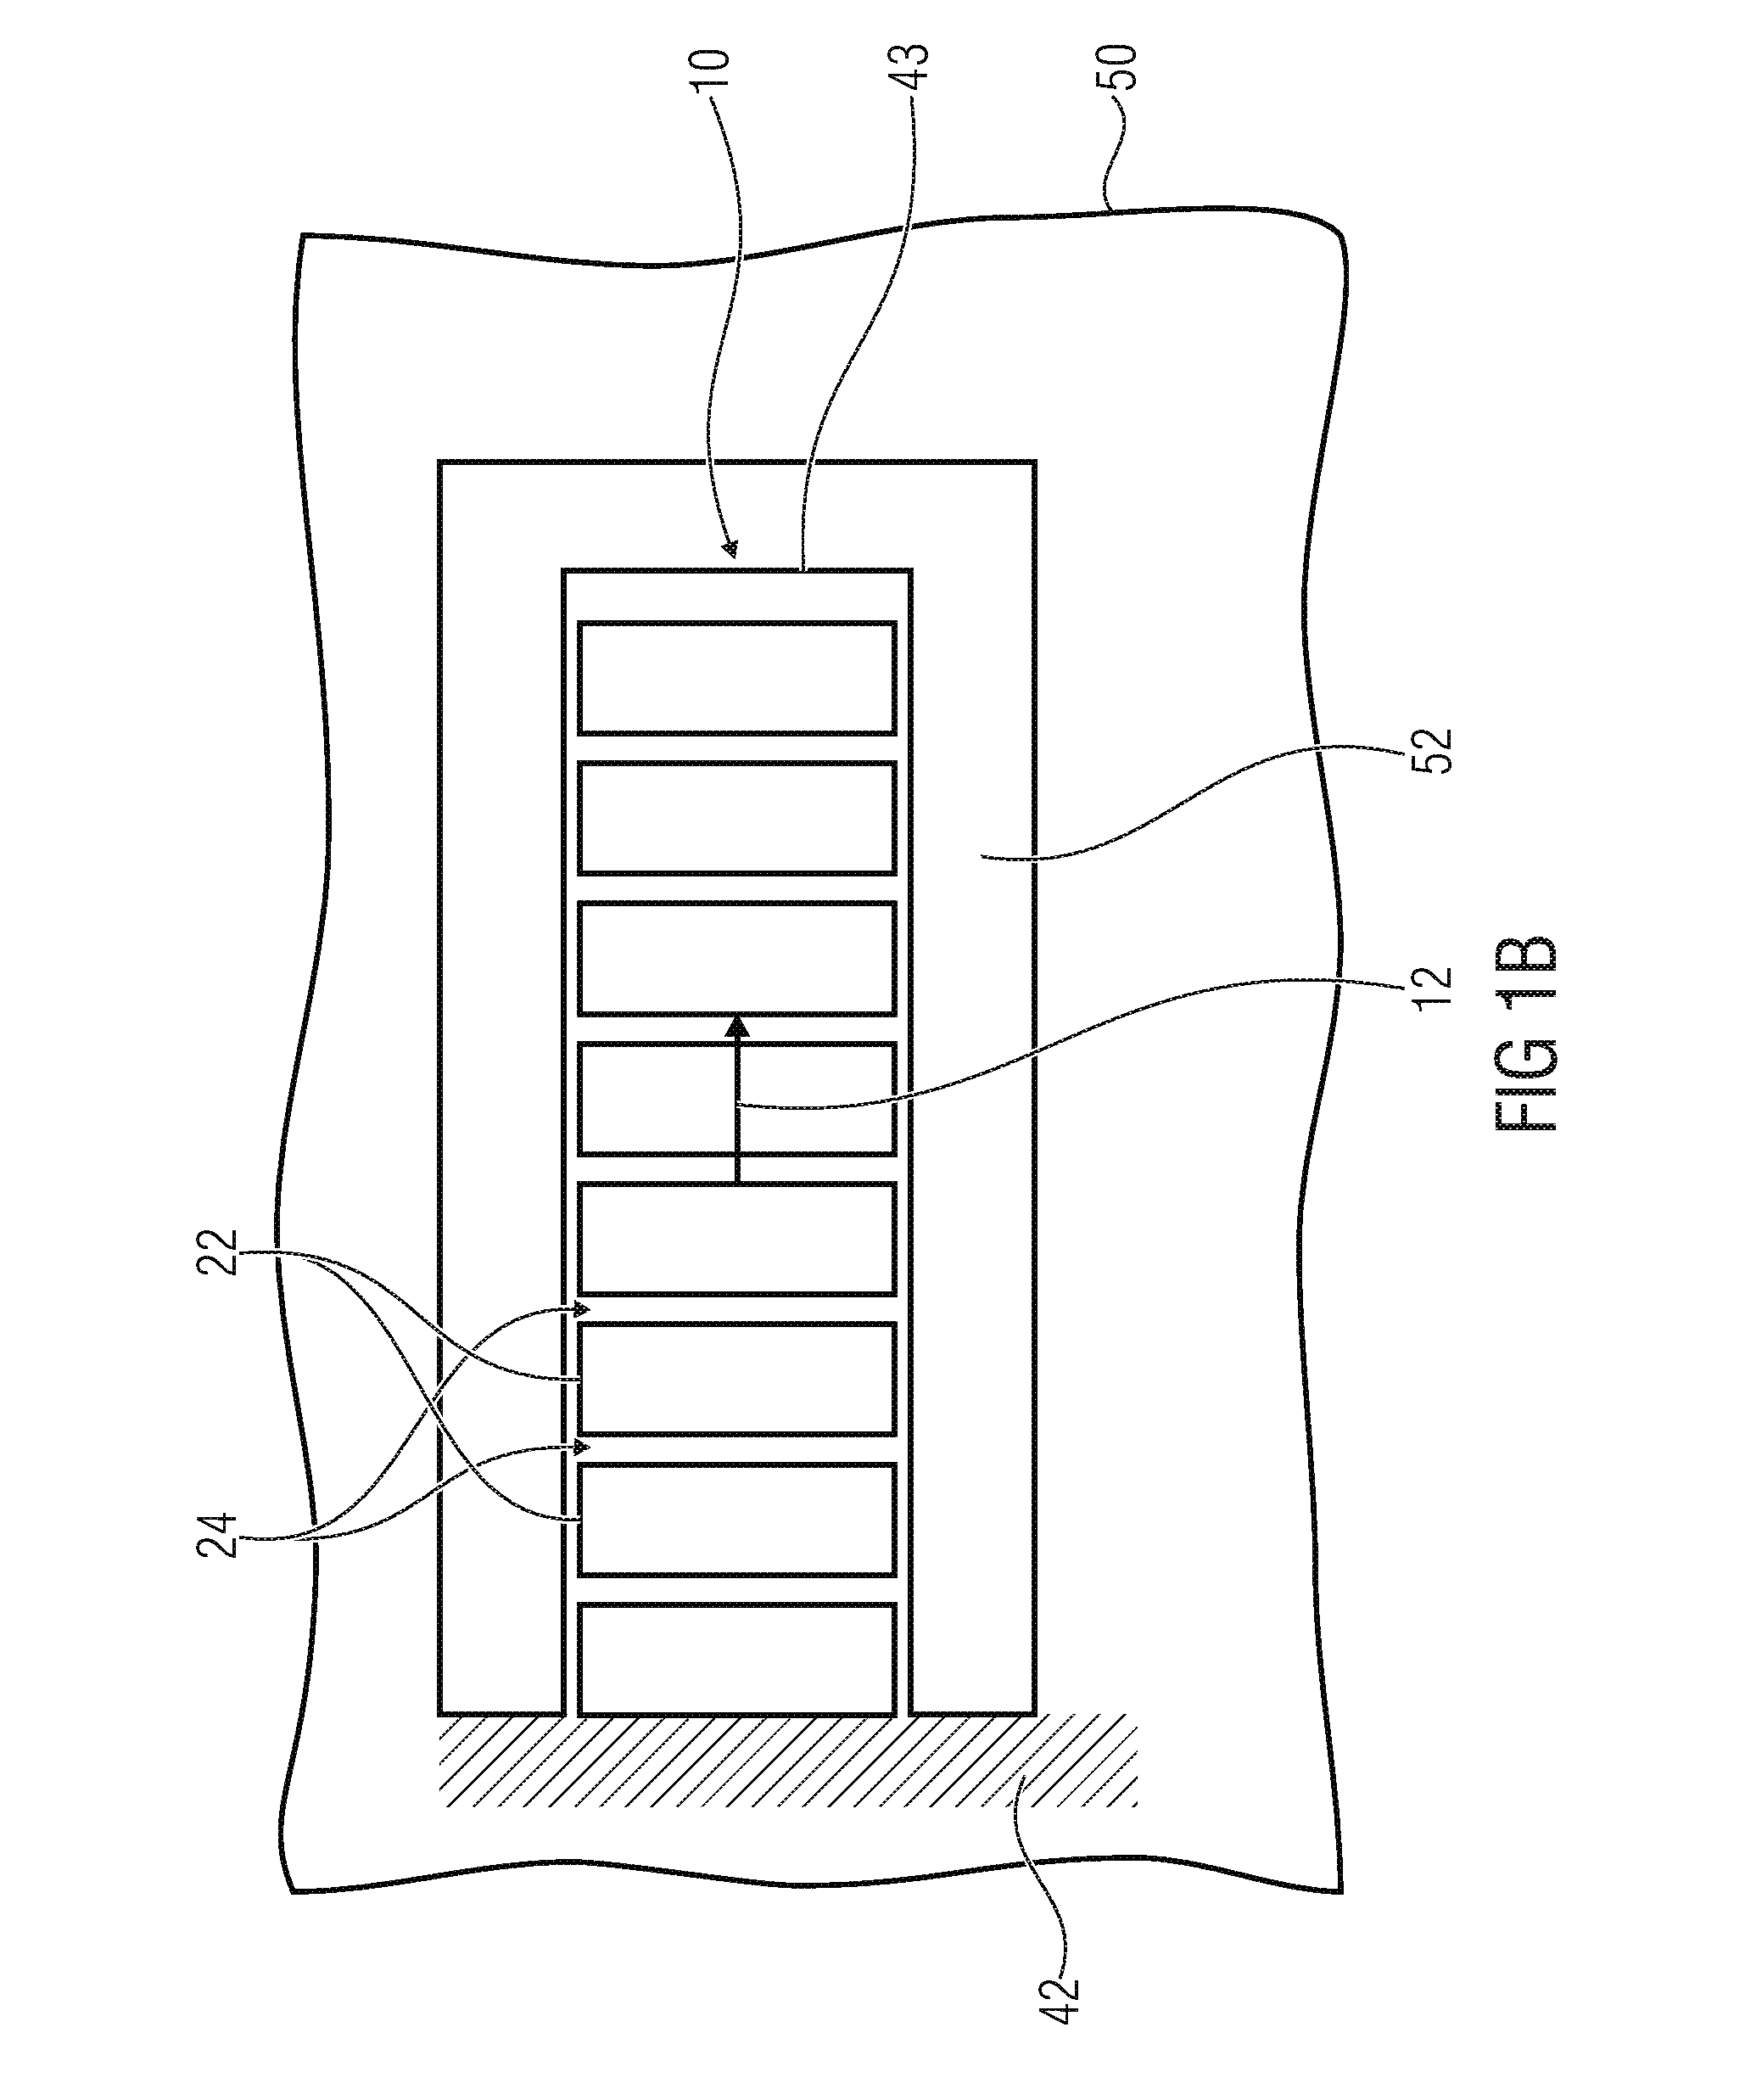 Micromechanical device with an actively deflectable element